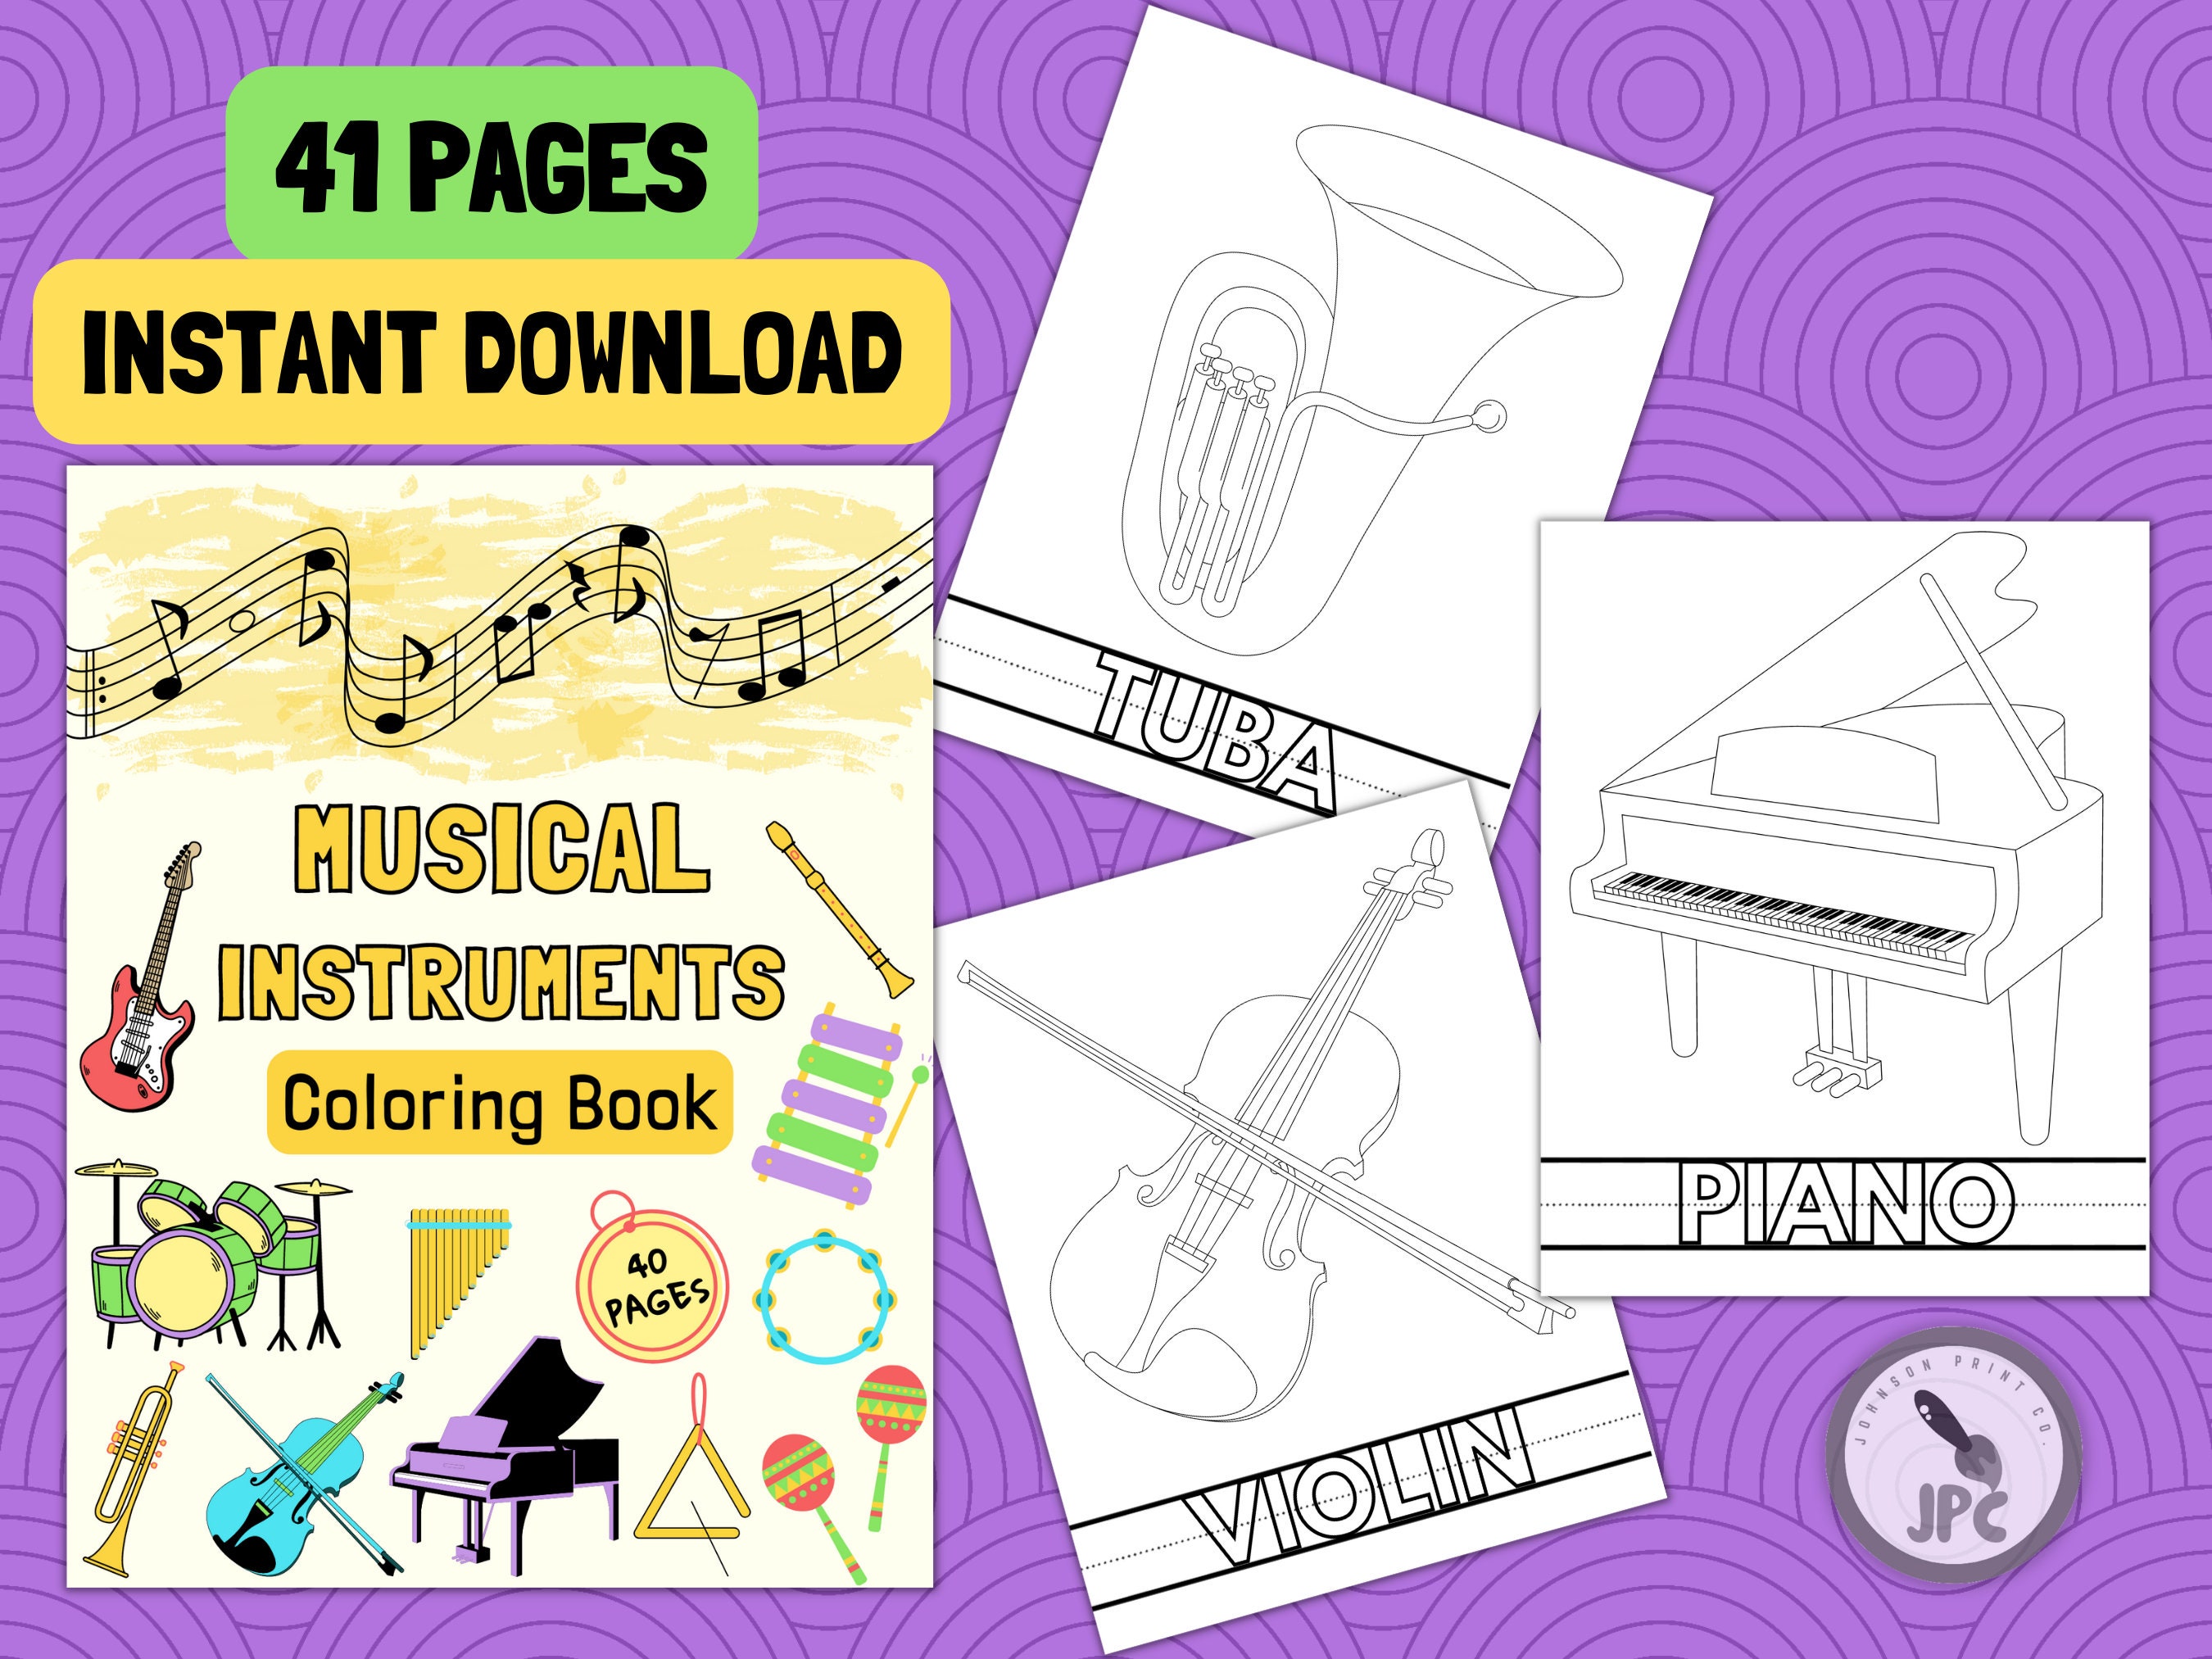 Musical Cabin Fever Colouring Ebook coloring Books/coloring Pages/adult  Coloring Books/coloring Books for Adults, Relaxing/gifts/music Art 